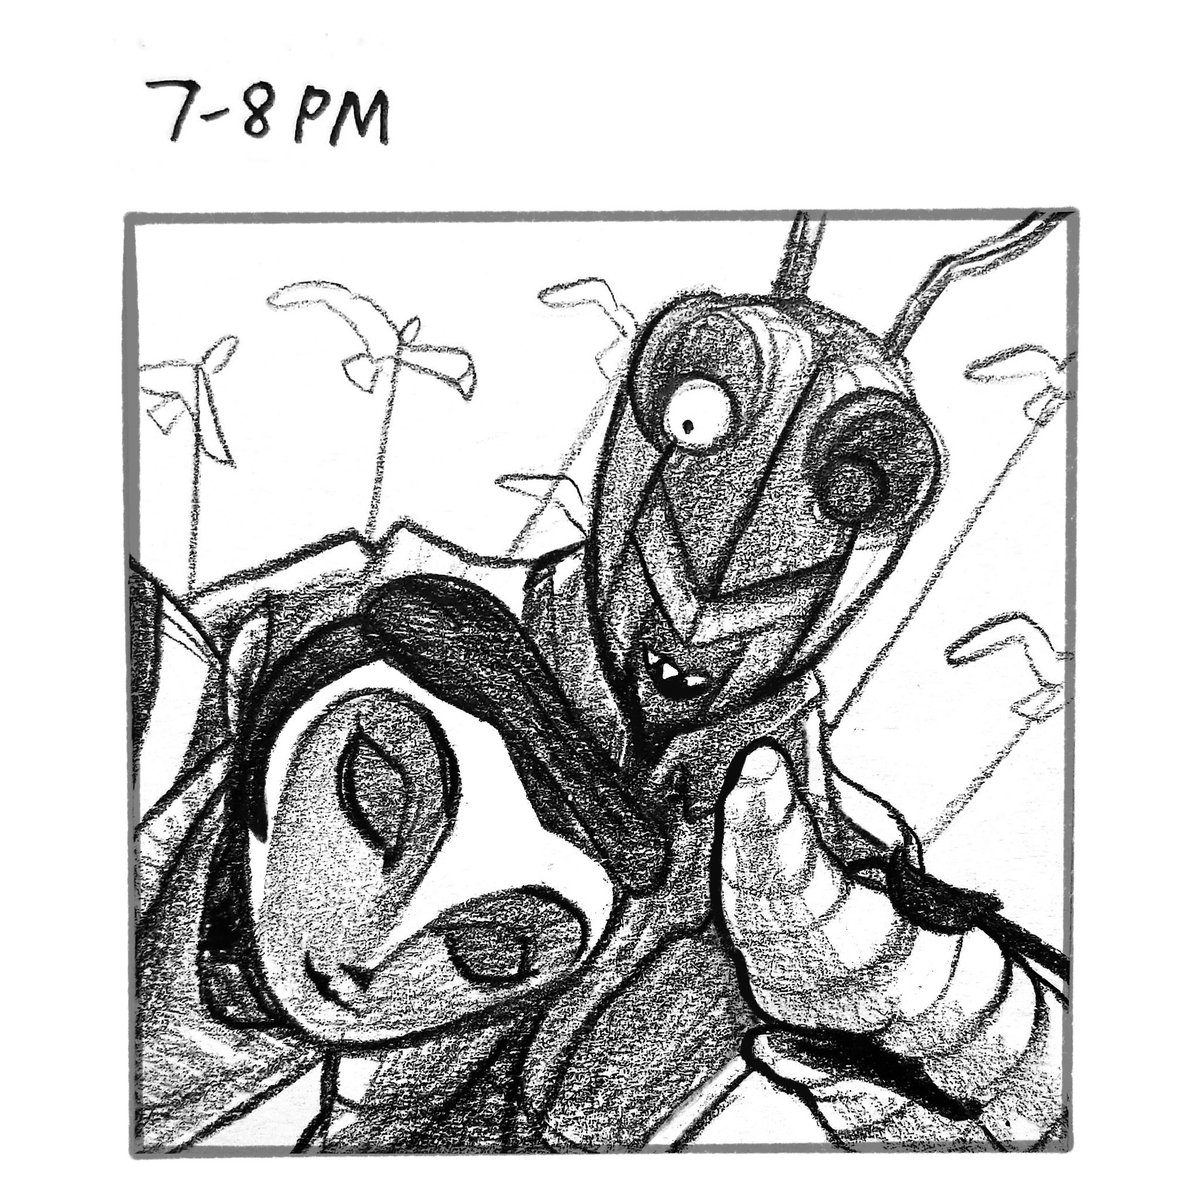 #hourlycomicday 7-8PM: James & the Giant Peach ???? 